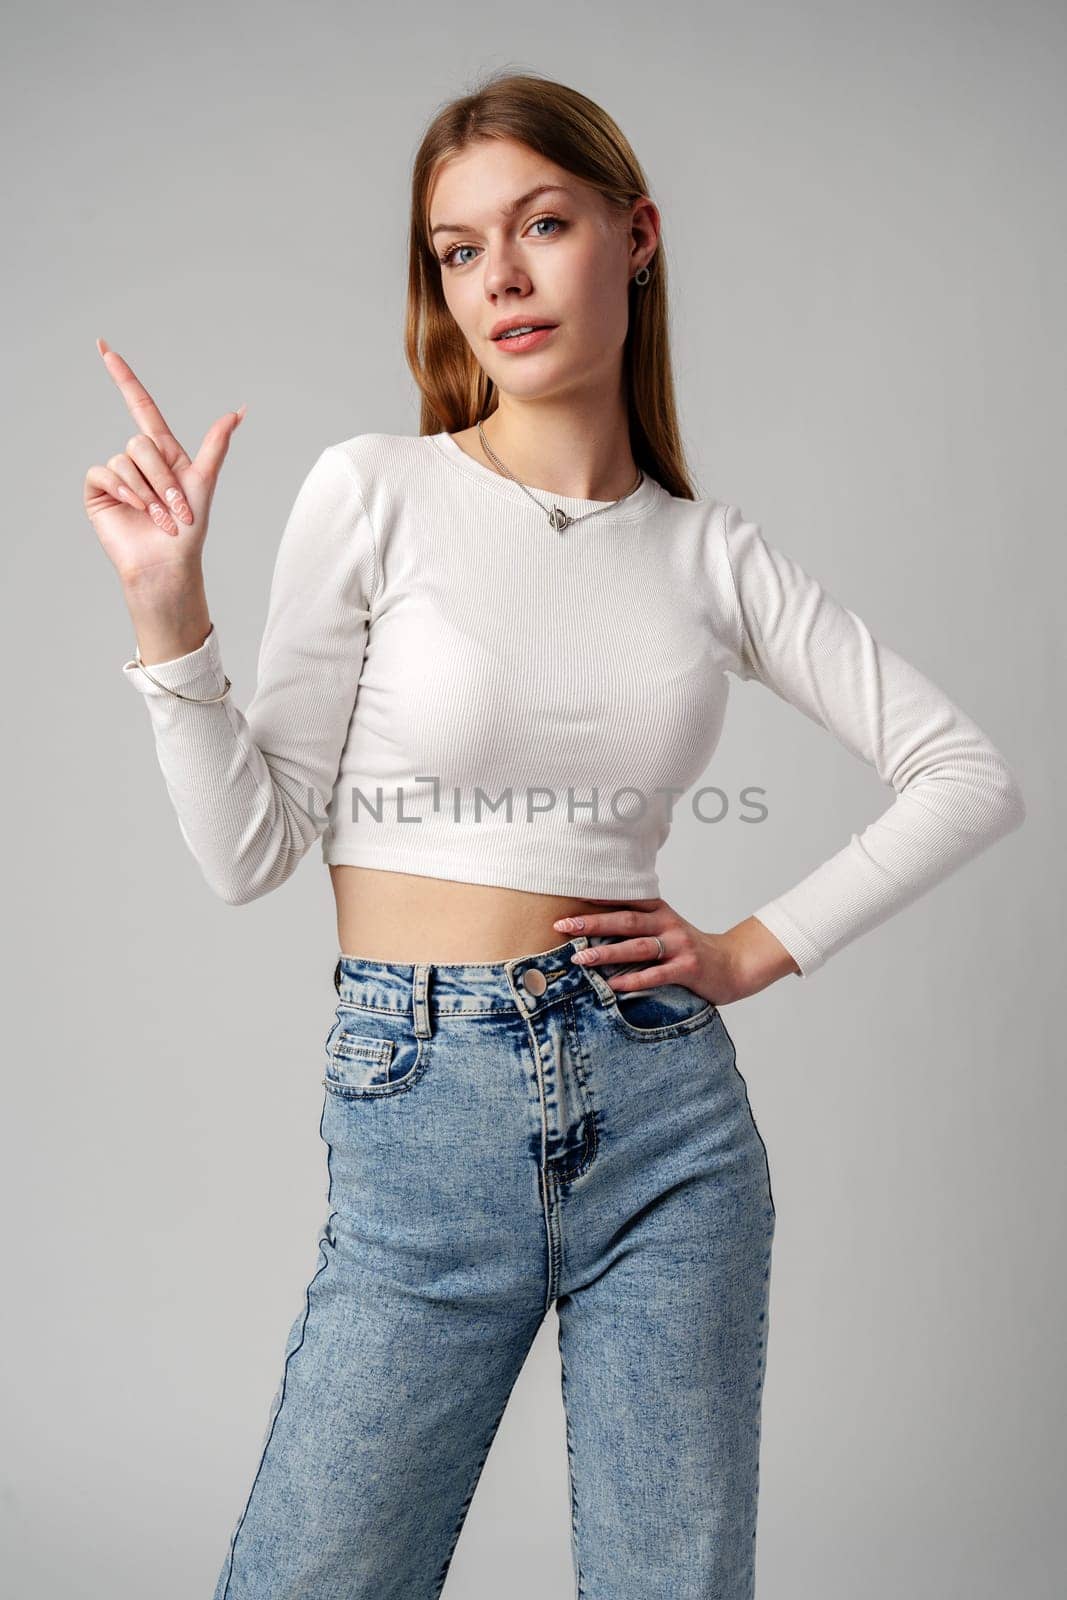 Young Woman Gesturing With Her Finger While Speaking Against a Gray Background by Fabrikasimf